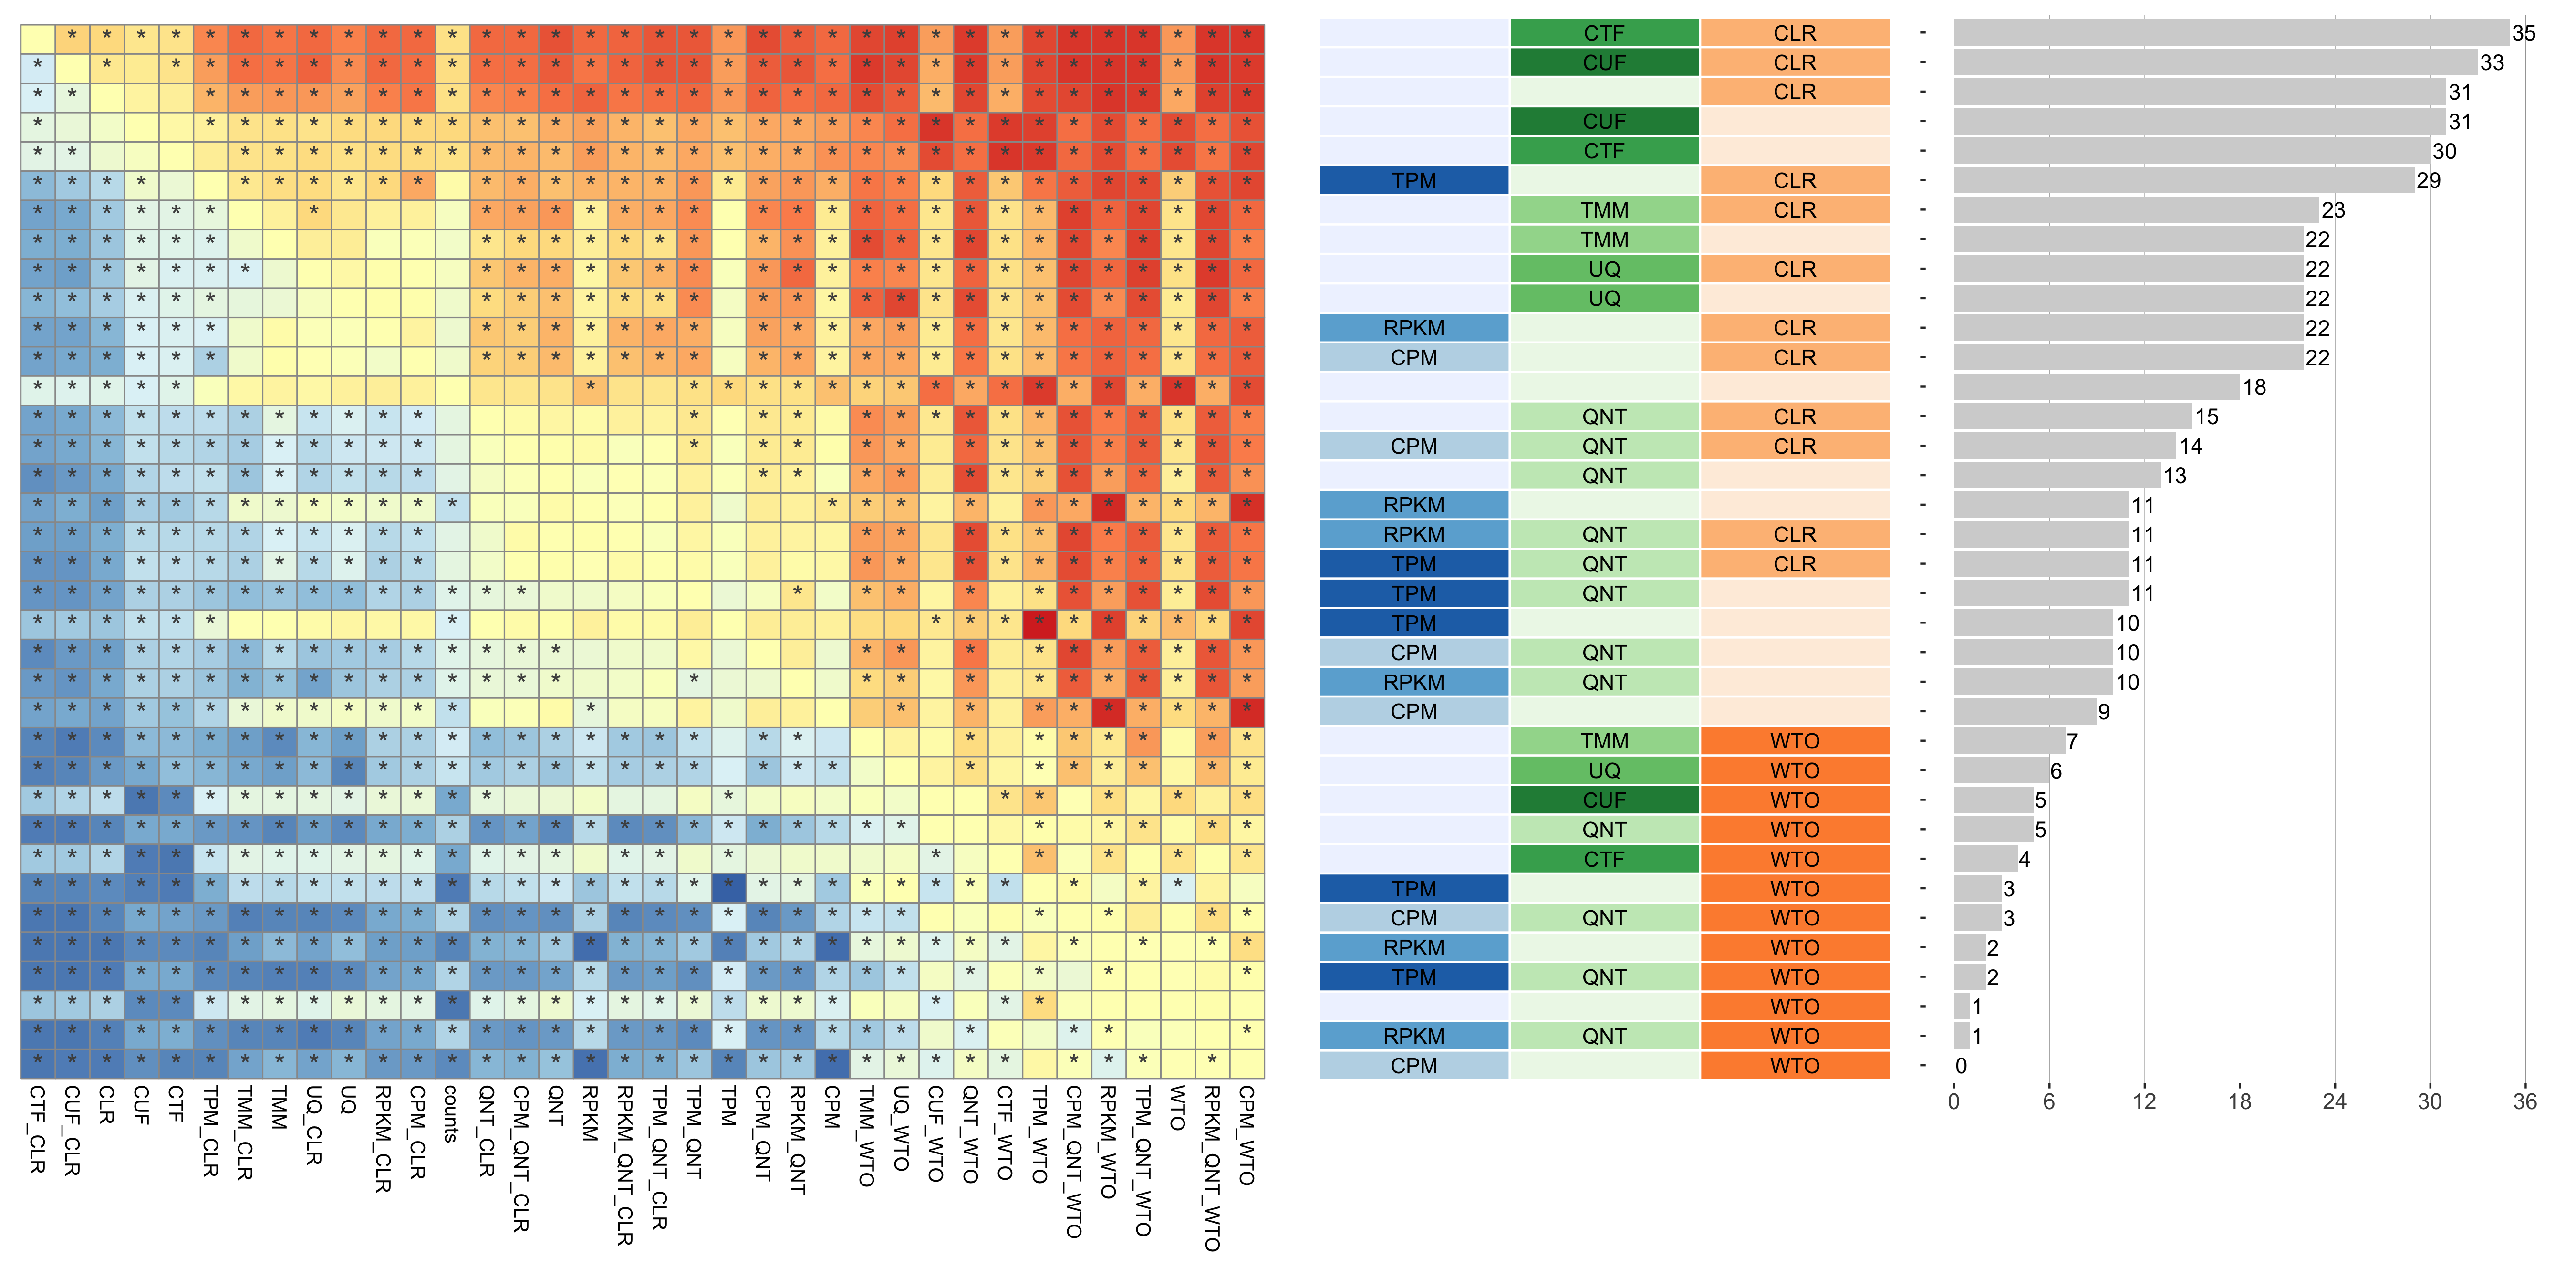 **Dataset-level pairwise comparison of workflow performance.** (**left**) The heatmap shows the relative performance of a pair of workflows, corresponding to a row and a column, directly compared to each other for the resampled GTEx datasets of a given sample size based on the tissue-aware gold standard. The color in each cell (row, column) represents the proportion of datasets for which the workflow along the row has a higher log2(auPRC/prior) than the workflow along the column. Comparisons that are statistically significant (corrected p < 0.01) based on a paired Wilcoxon test are marked with an asterisk. (**middle**) The workflows (rows) are described in terms of the specific method used in the within-sample normalization (blues), between-sample normalization (greens), and network transformation (oranges) stages. (**right**) The barplot shows the number of times each workflow was significantly greater than another workflow.